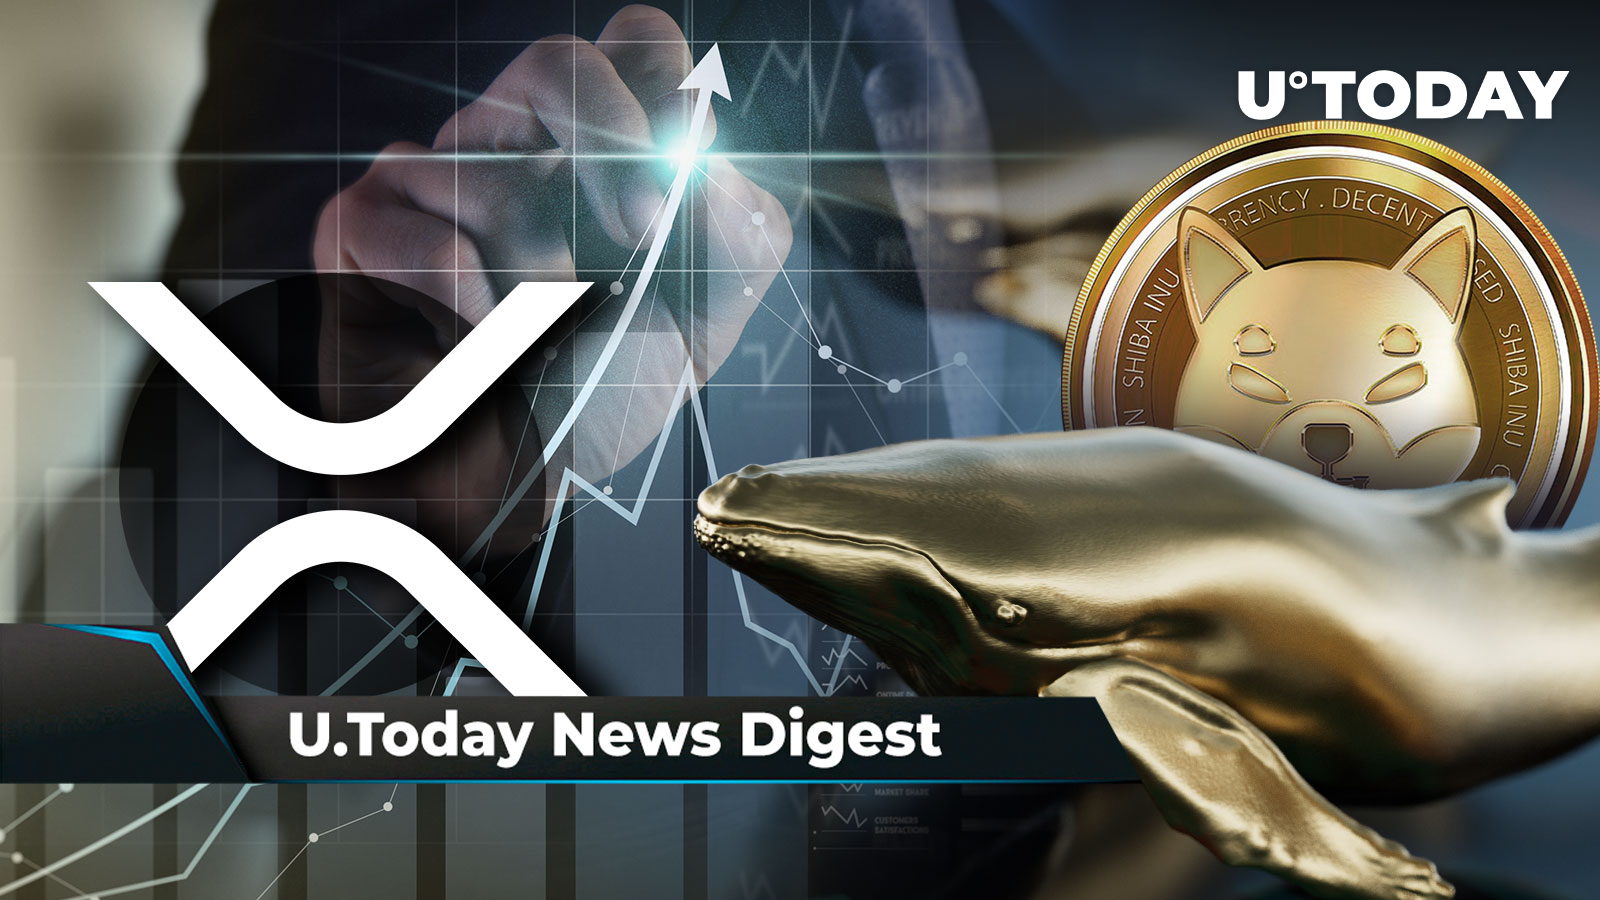 Ripple and SEC Might Settle Their Case, XRP Just Beat Bitcoin, SHIB Whales’ Inflow Surges by 3,700%: Crypto News Digest by U.Today